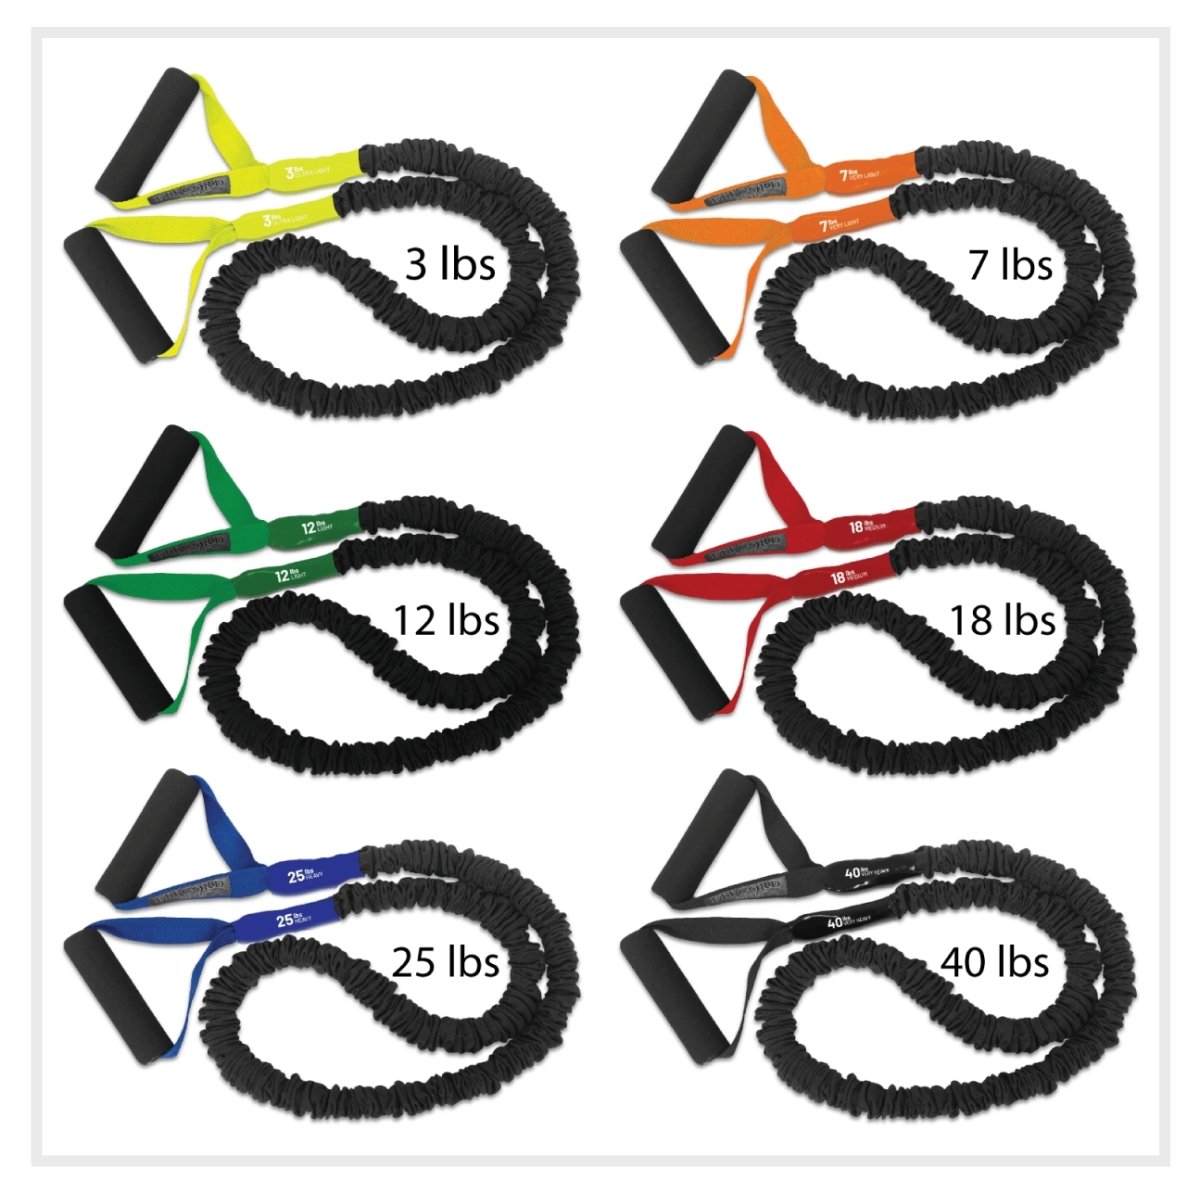 American made covered tube resistance bands with handles. 3lbs 7lbs 12lbs 18lbs 25lbs and 40lbs in a set of 6 bands. portable tension workout bands with padded handles on both ends. great for home gym